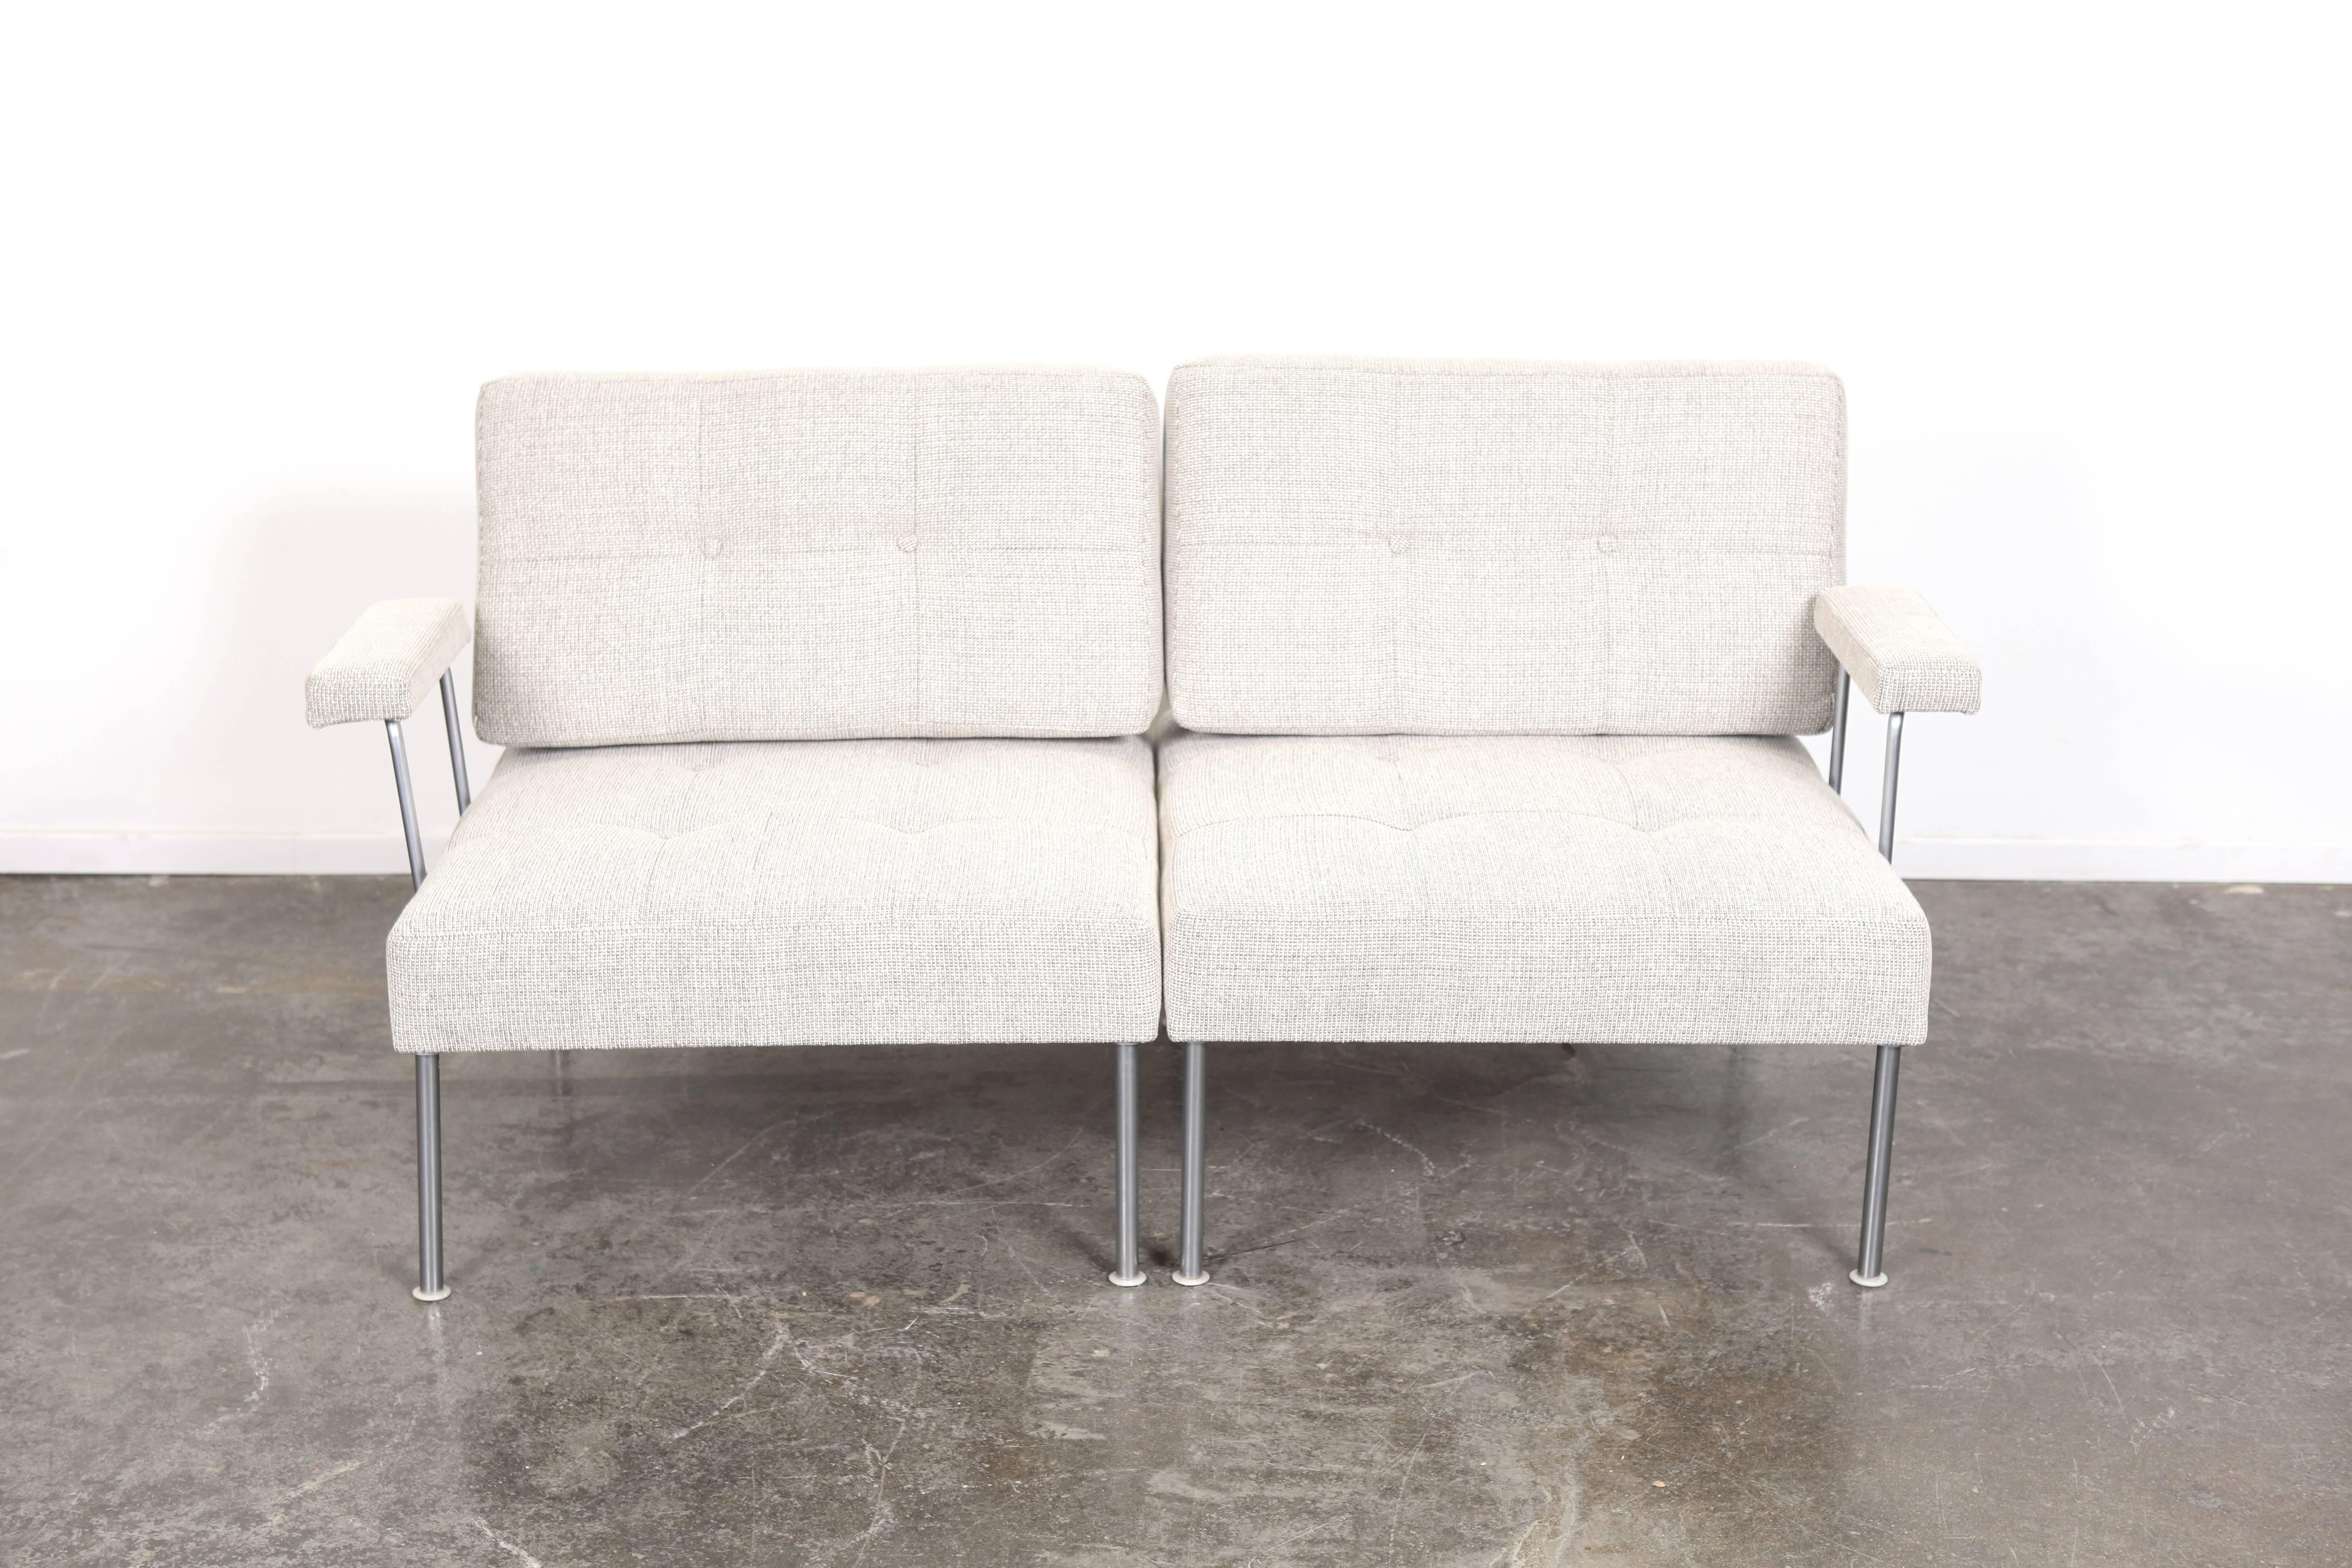 Danish Mid-Century Modern modular steel frame 'Revolt' sectional sofa by Poul Cadovius. Newly upholstered in a combination of cement and off-white contrasted with a dark grey weave.